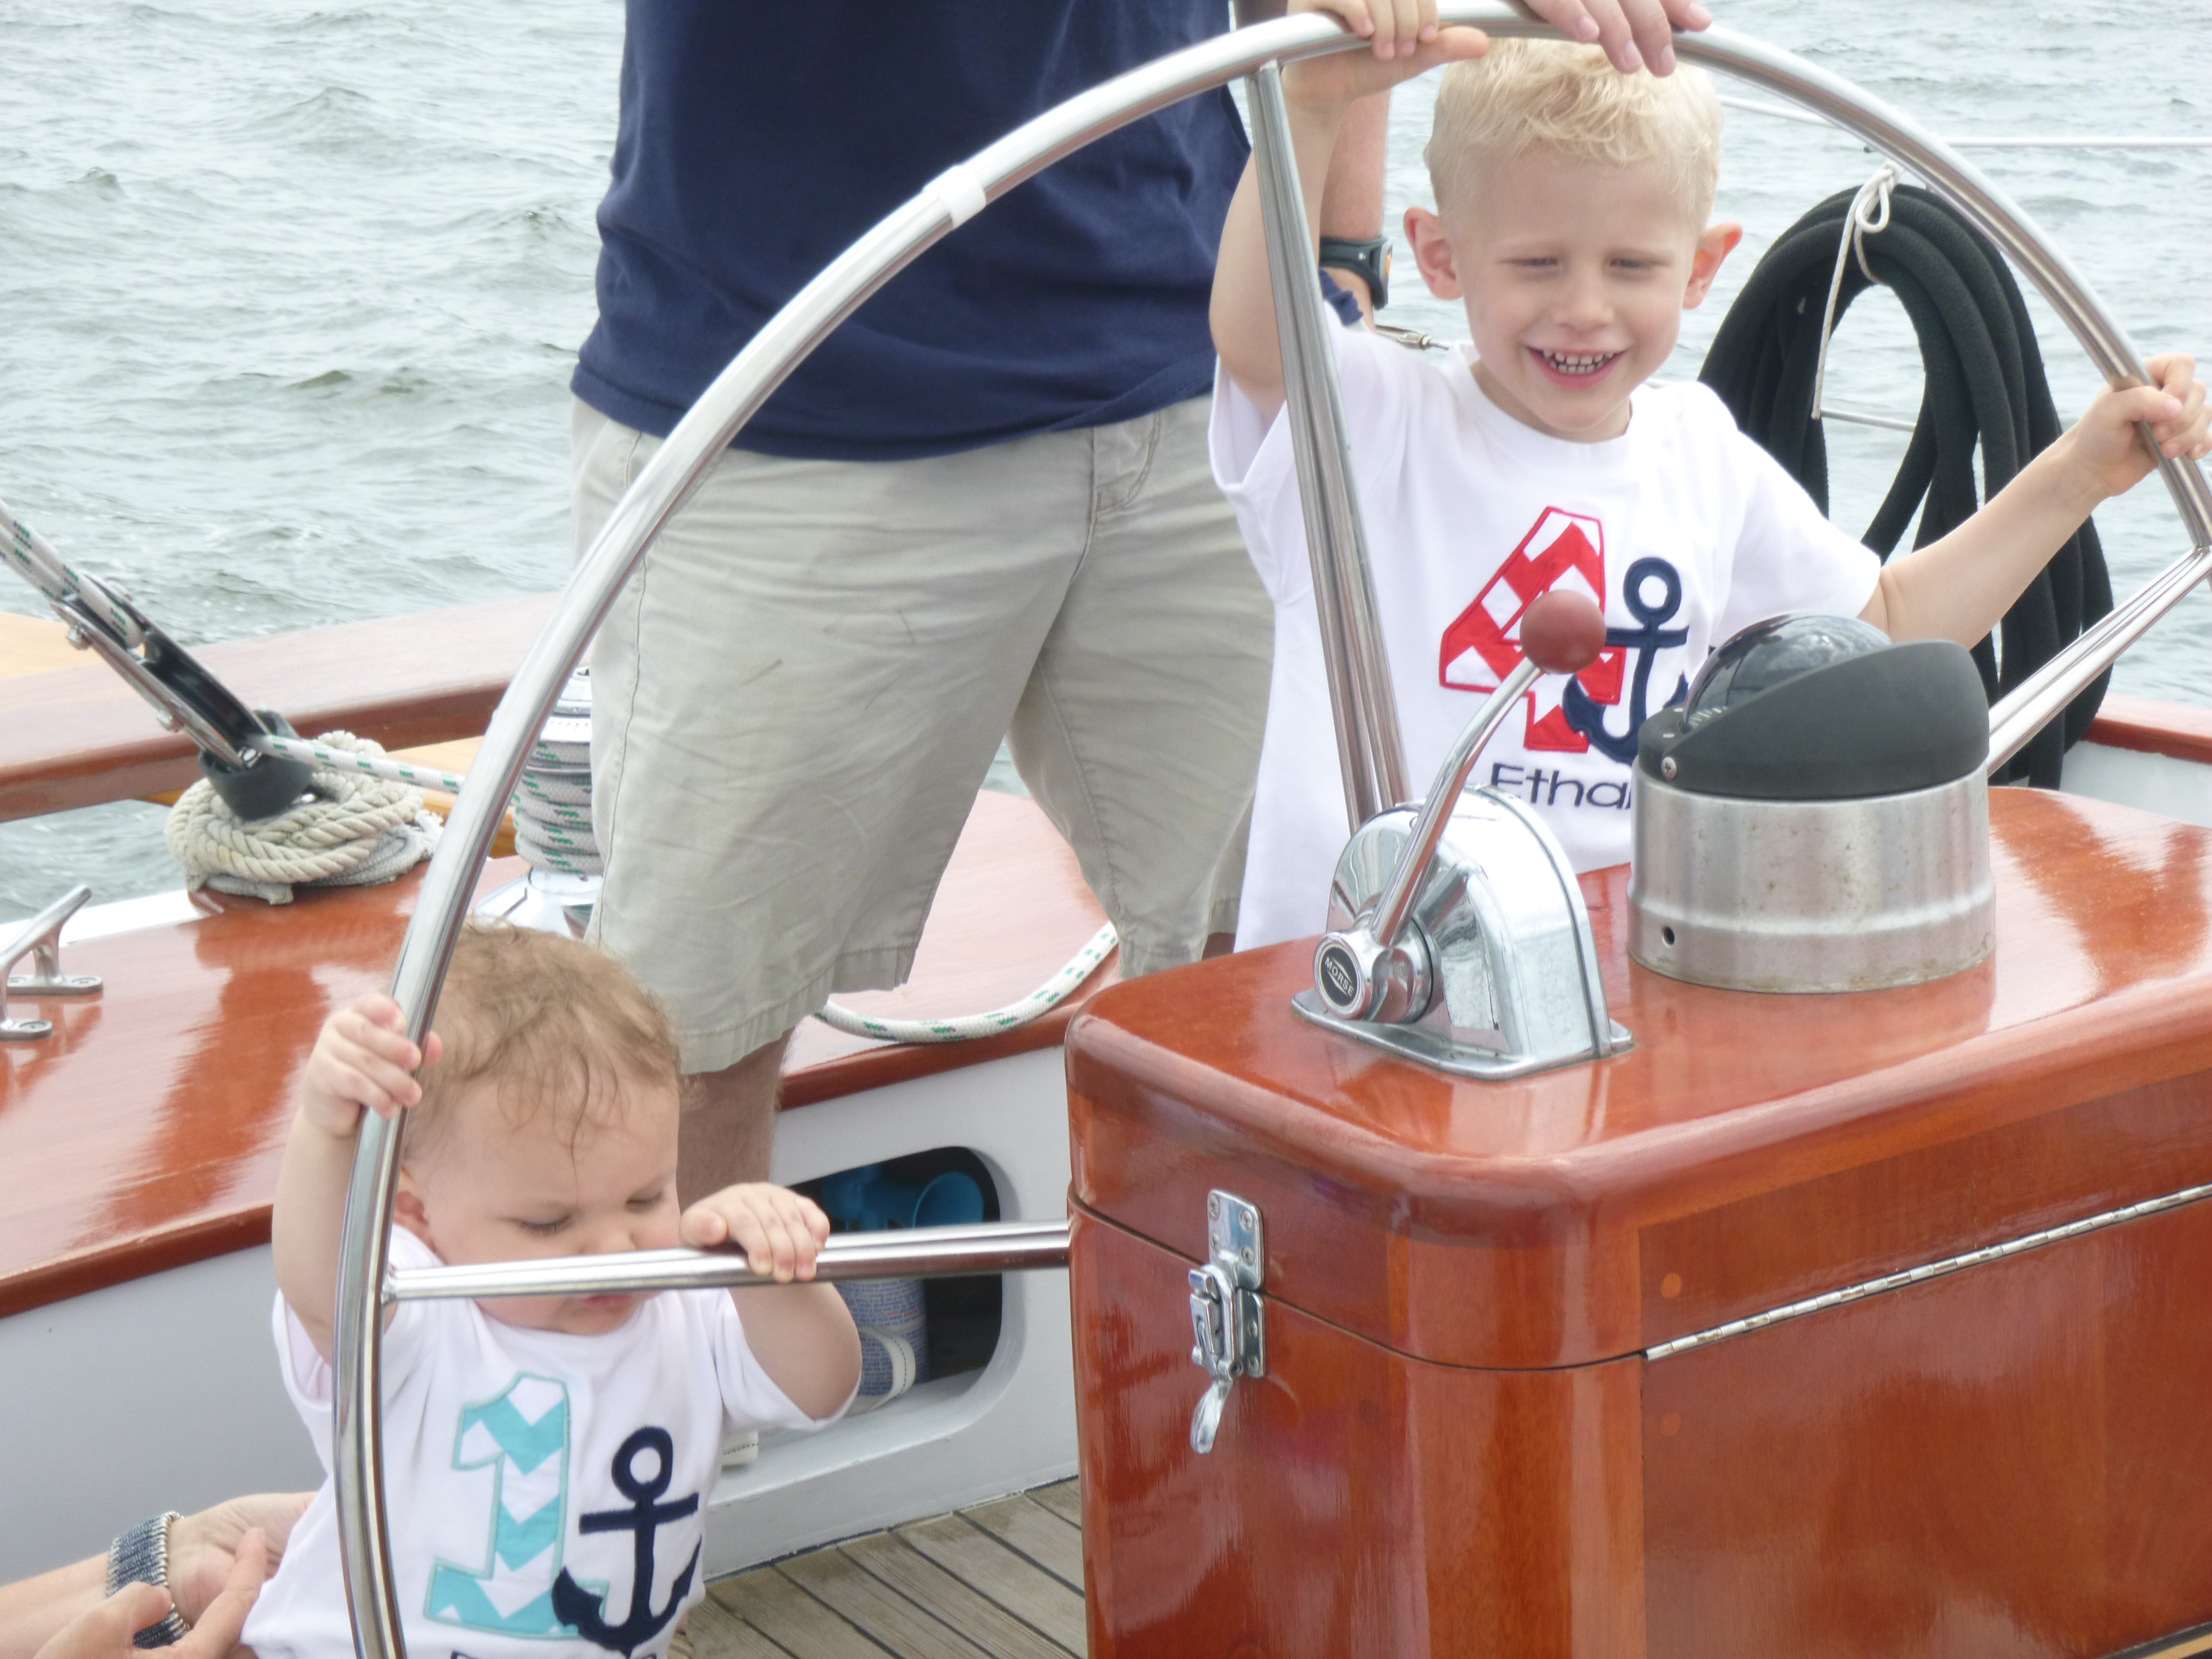 Two very young guests helping to steer the schooner